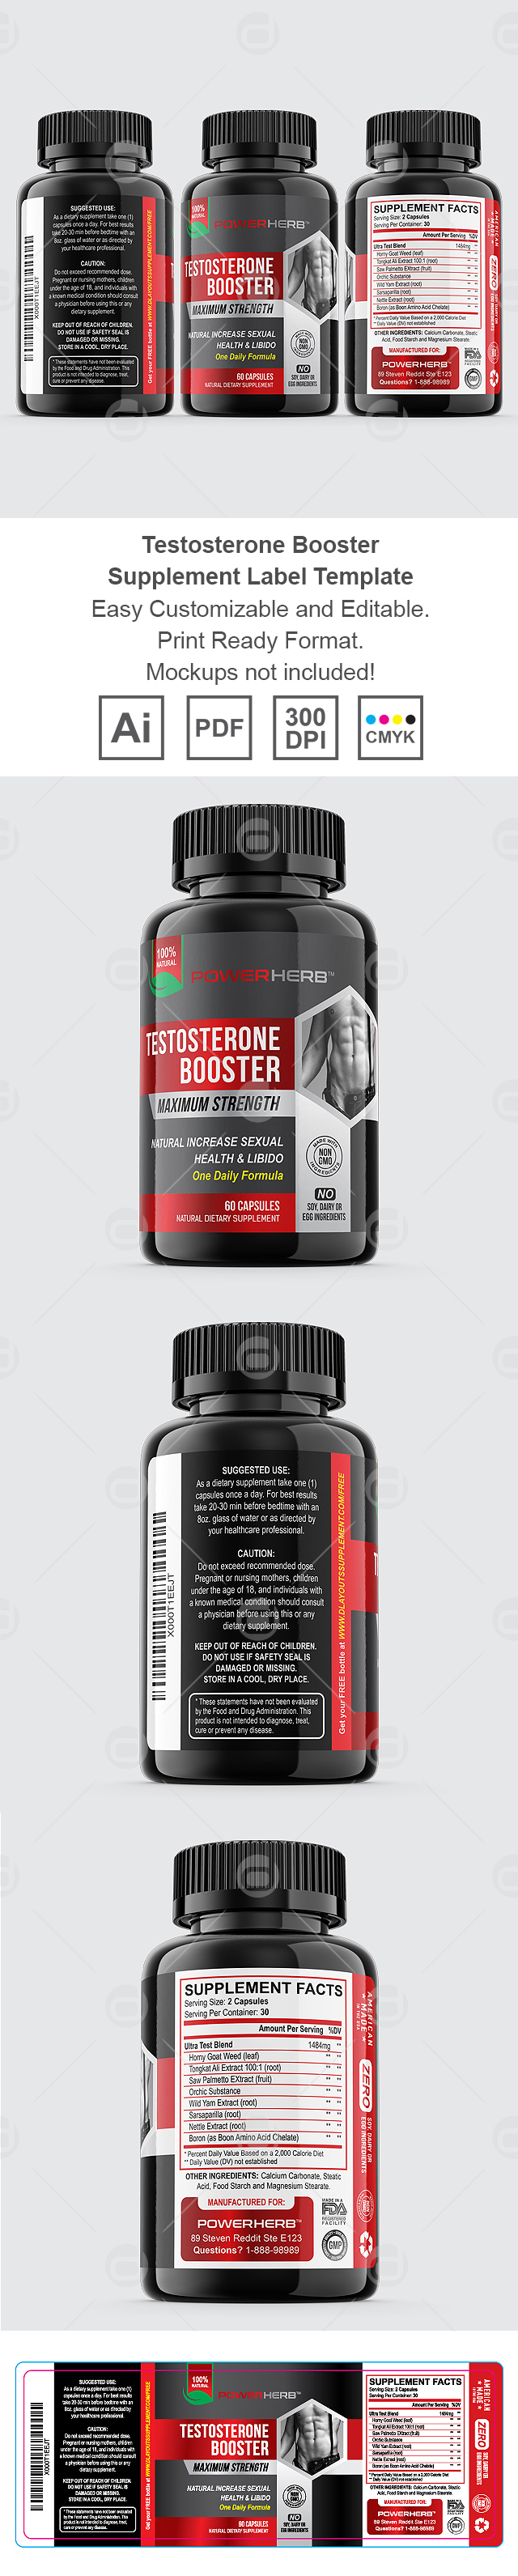 Testosterone Booster Supplement Label Template